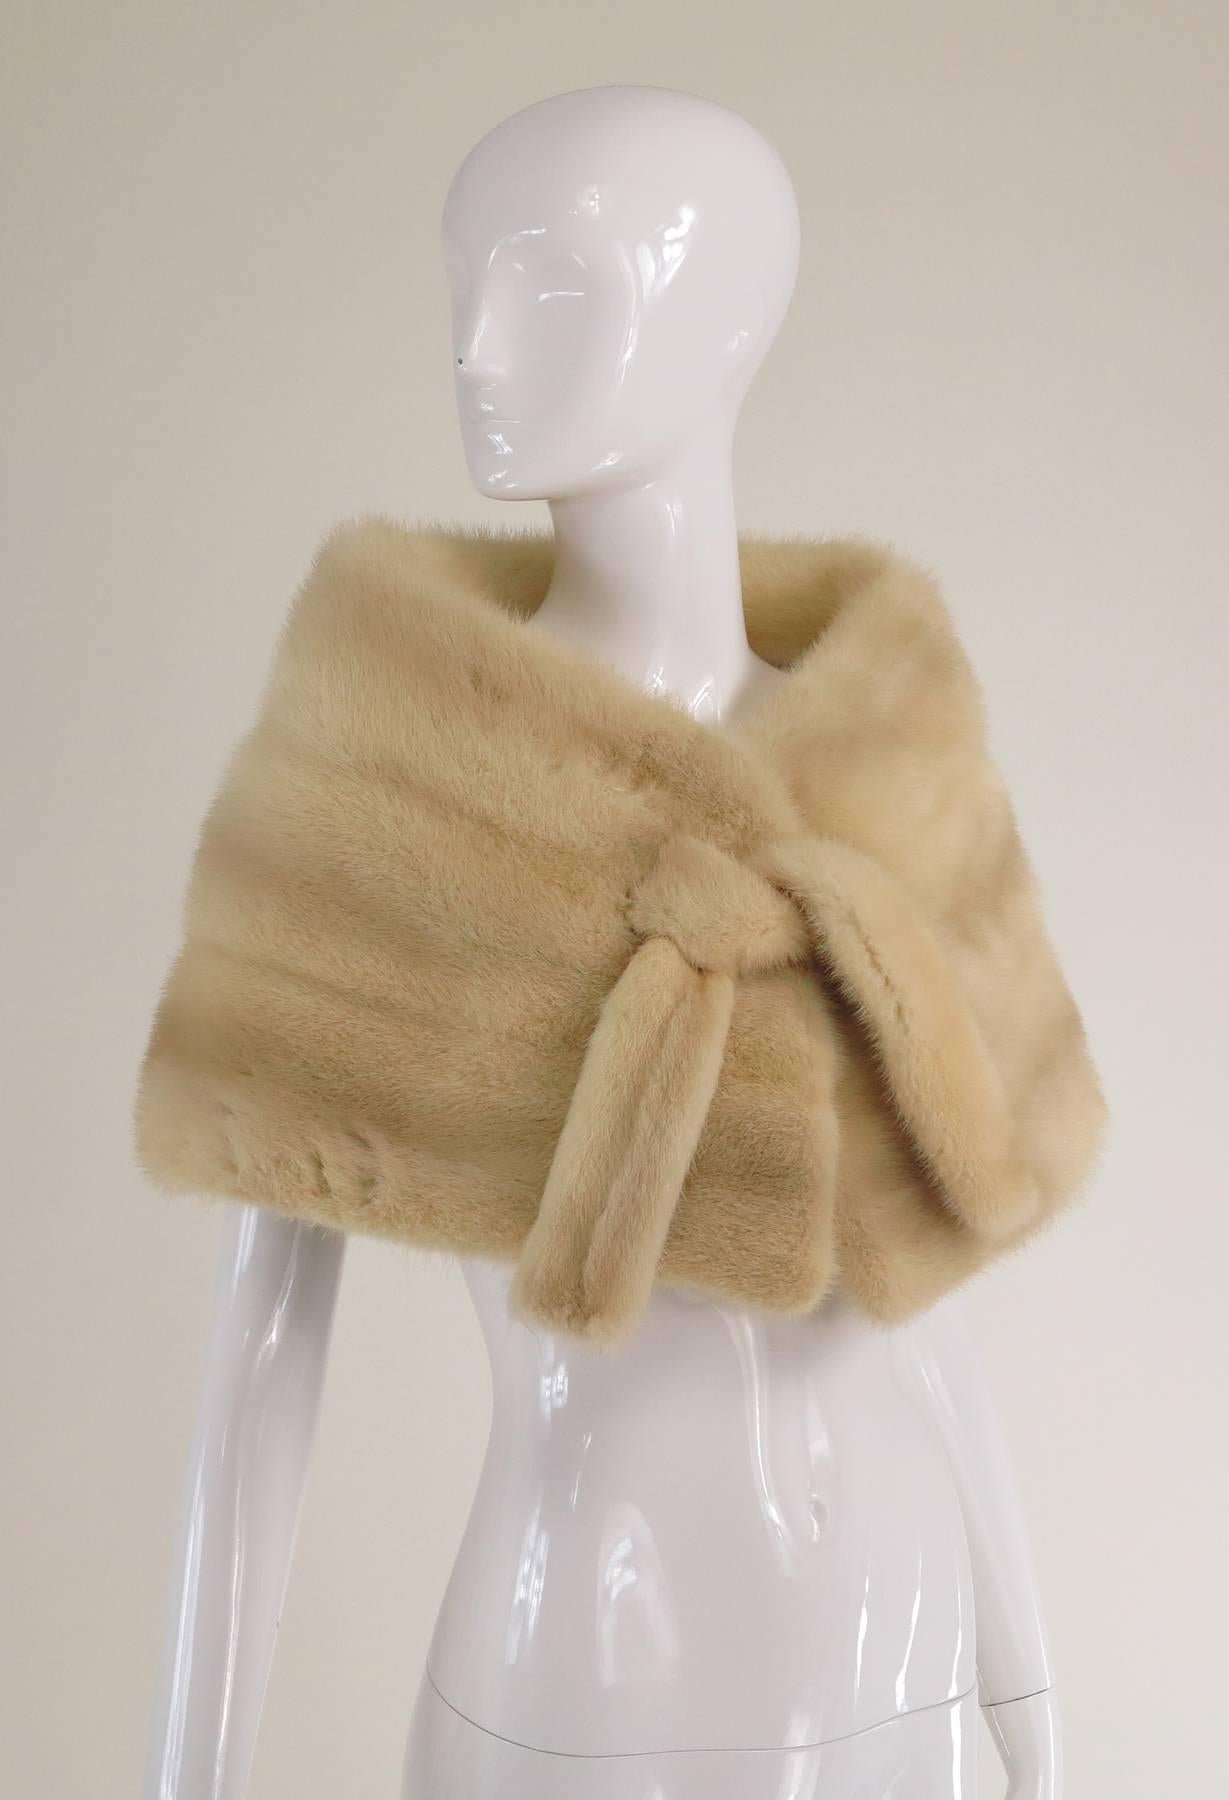 Gunther Jaeckel Furs Bonwit Teller champagne mink tie front cape 1960s...A lovely little cape that would be perfect for a wedding or other big event!  Champagne colour cape closes at the front with hooks and fur ties...Beautifully lined in silk with